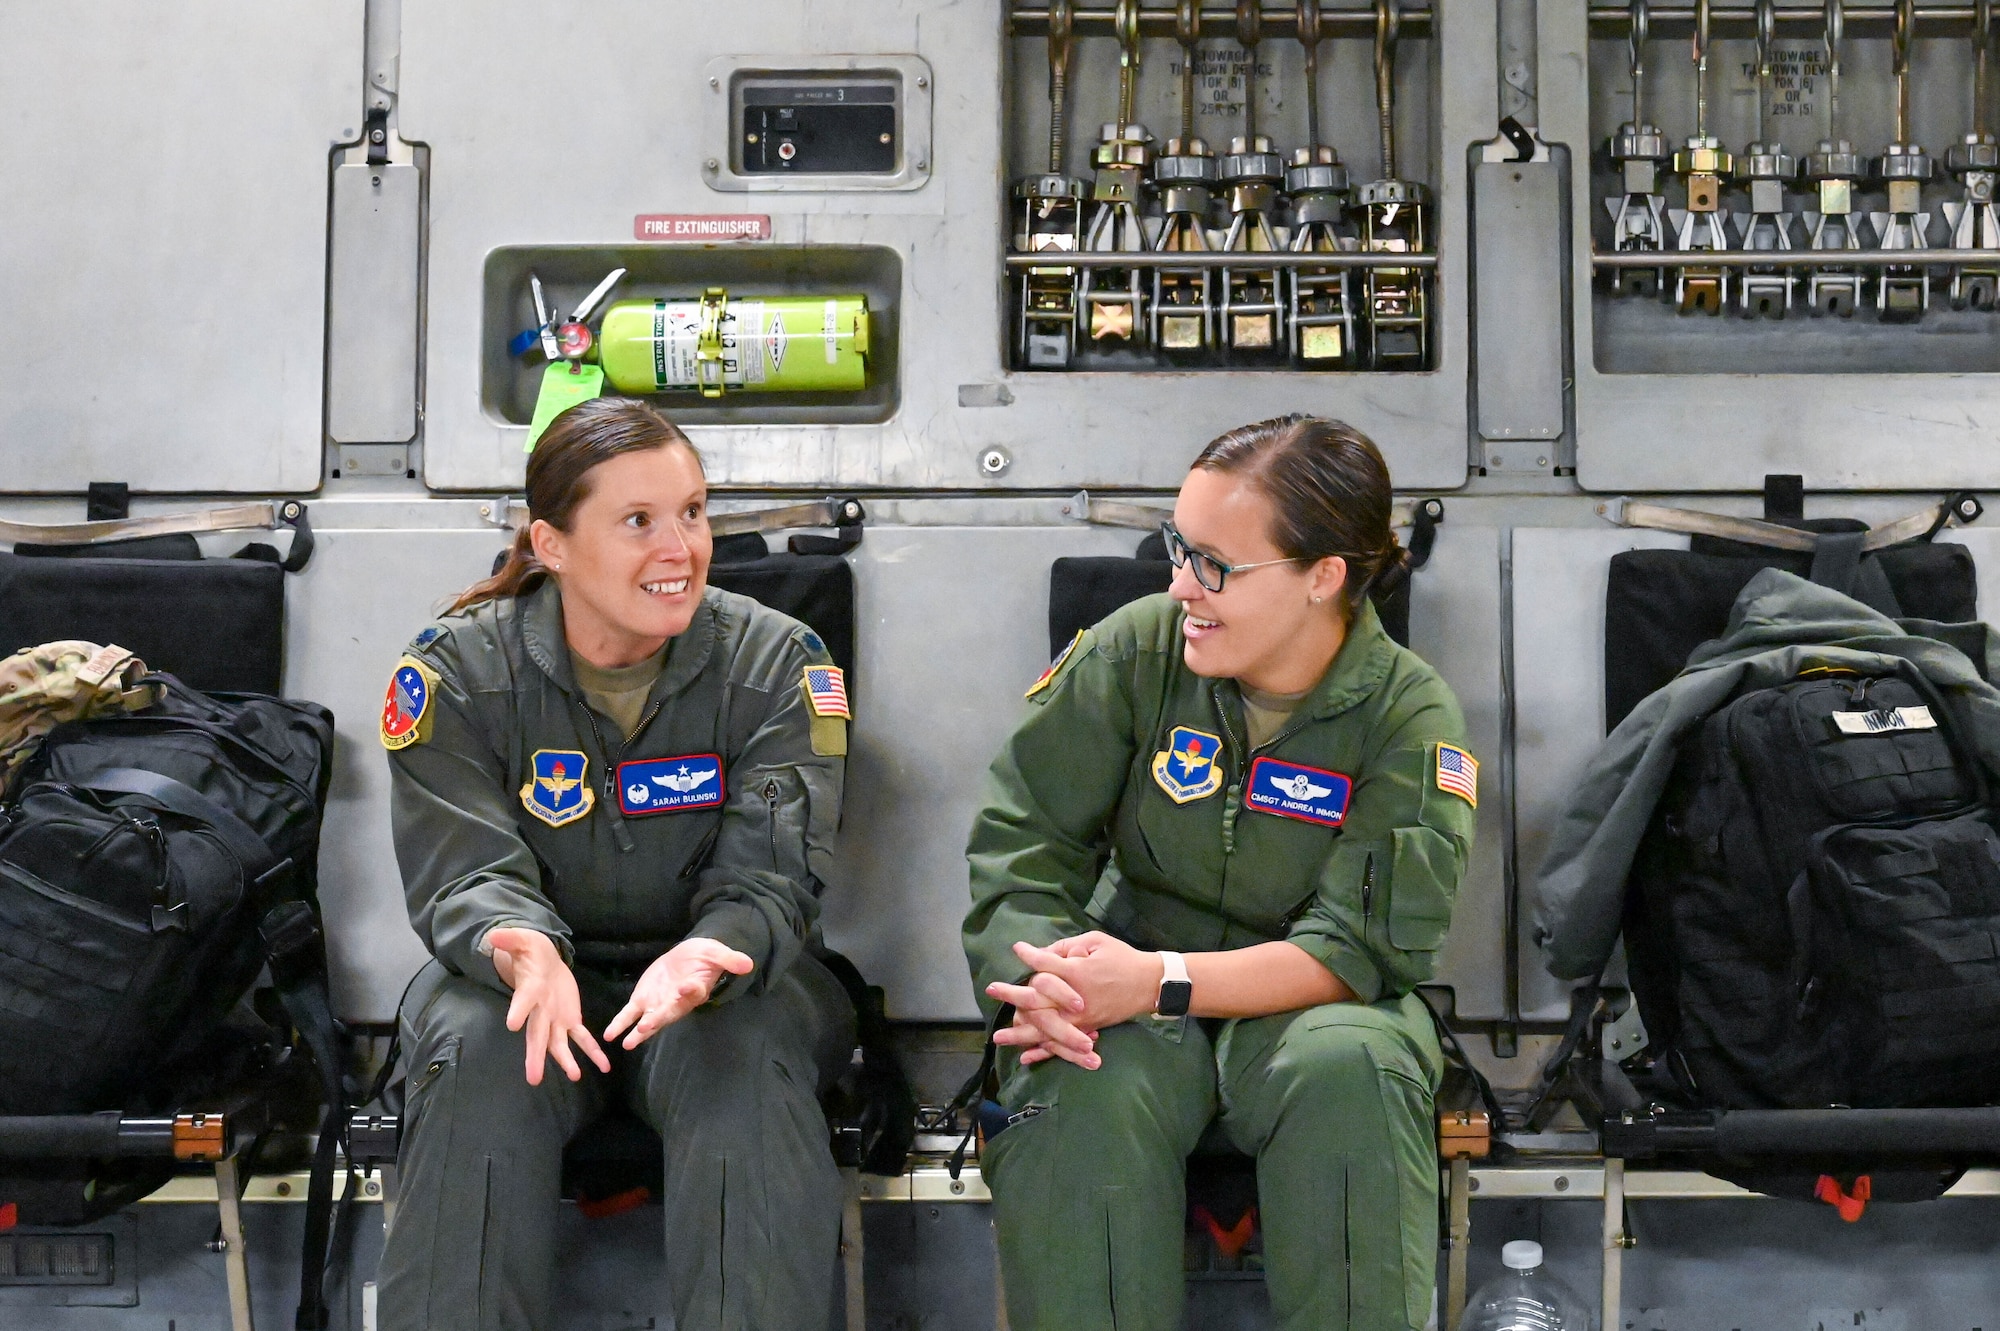 U.S. Air Force Lt. Col. Sarah Brilinski, left, 54th Air Refueling Squadron (ARS) commander, speaks to Chief Master Sgt. Andrea Inmon, right, 54th ARS senior enlisted leader, during a flight from Altus Air Force Base (AFB), Oklahoma, to attend the Torch Athena Rally in San Antonio, Texas, Sept. 19, 2023. The Aircrew from Altus AFB attended the event to showcase static displays of a KC-135 Stratotanker, KC-46 Pegasus and a C-17 Globemaster III. (U.S. Air Force photo by Airman 1st Class Heidi Bucins)